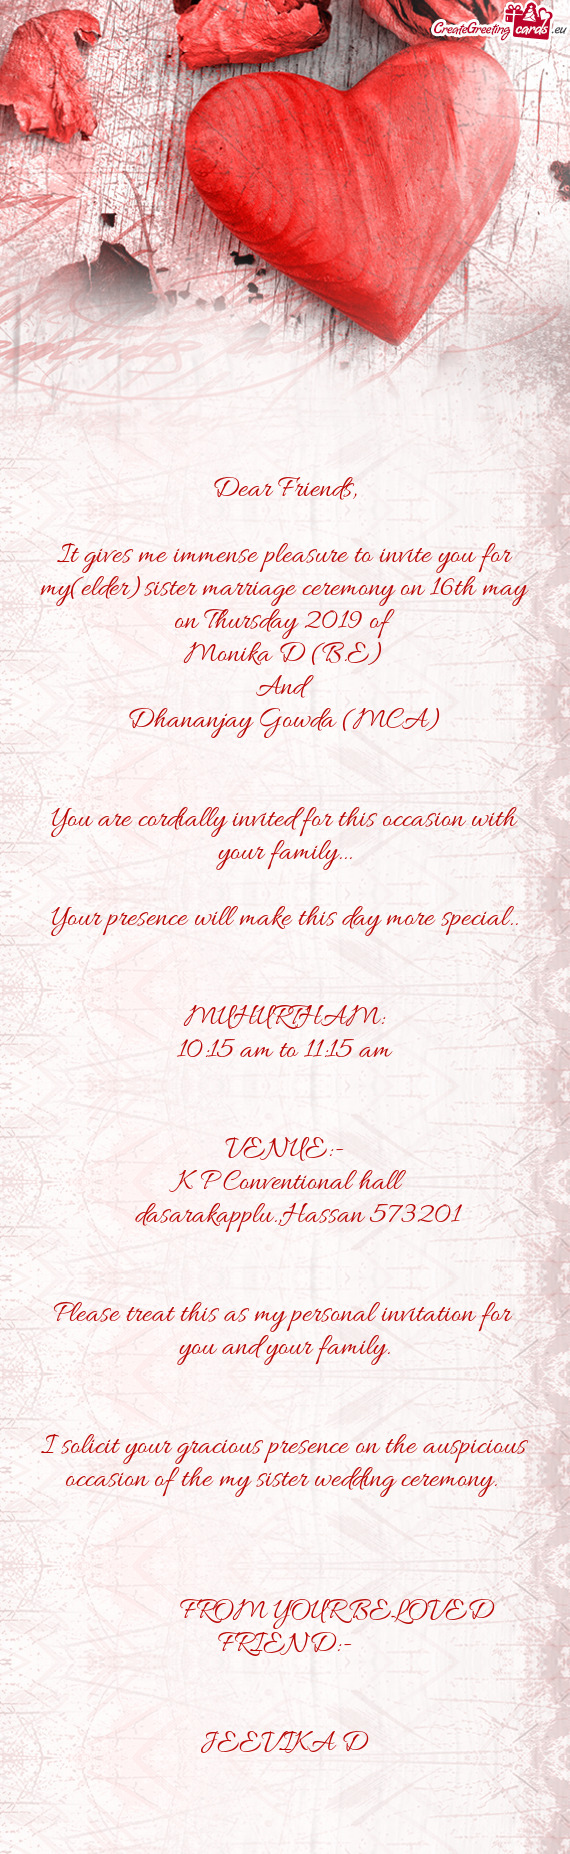 E)
 And
 Dhananjay Gowda (MCA)
 
 
 You are cordially invited for this occasion with your family